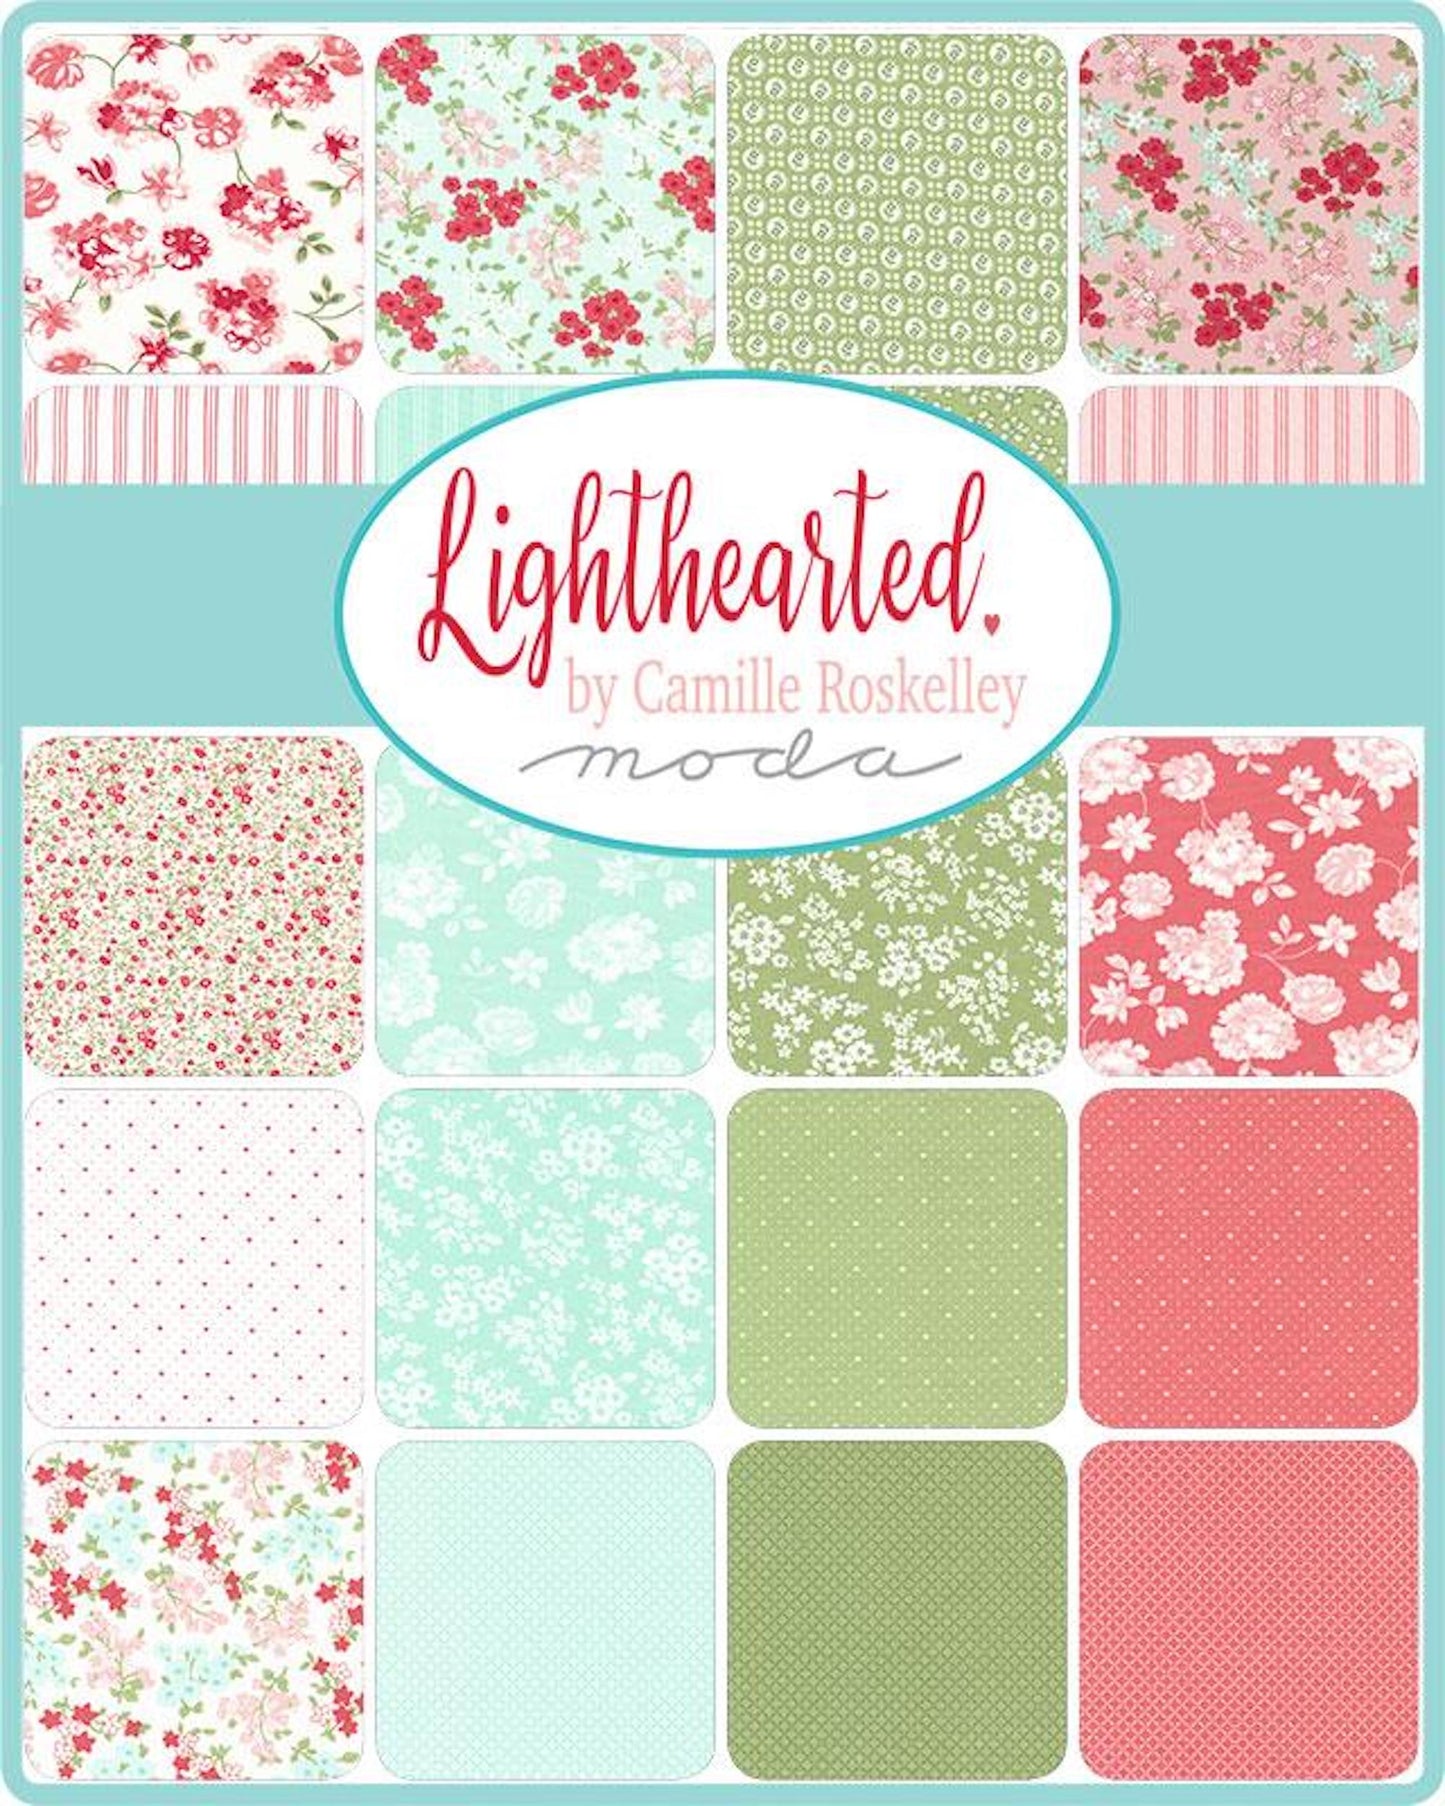 Lighthearted- 42 Piece Charm Pack